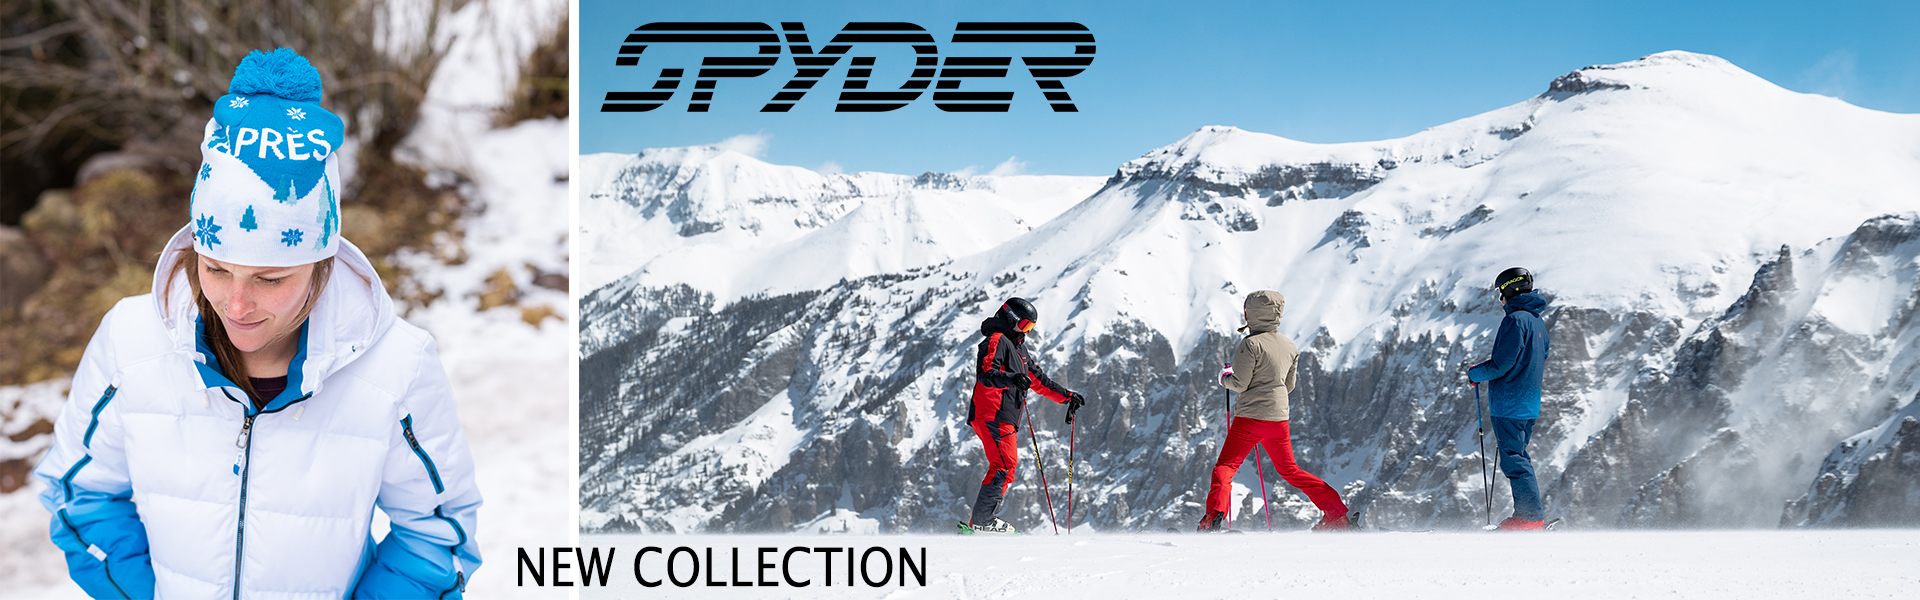 Spyder new collection